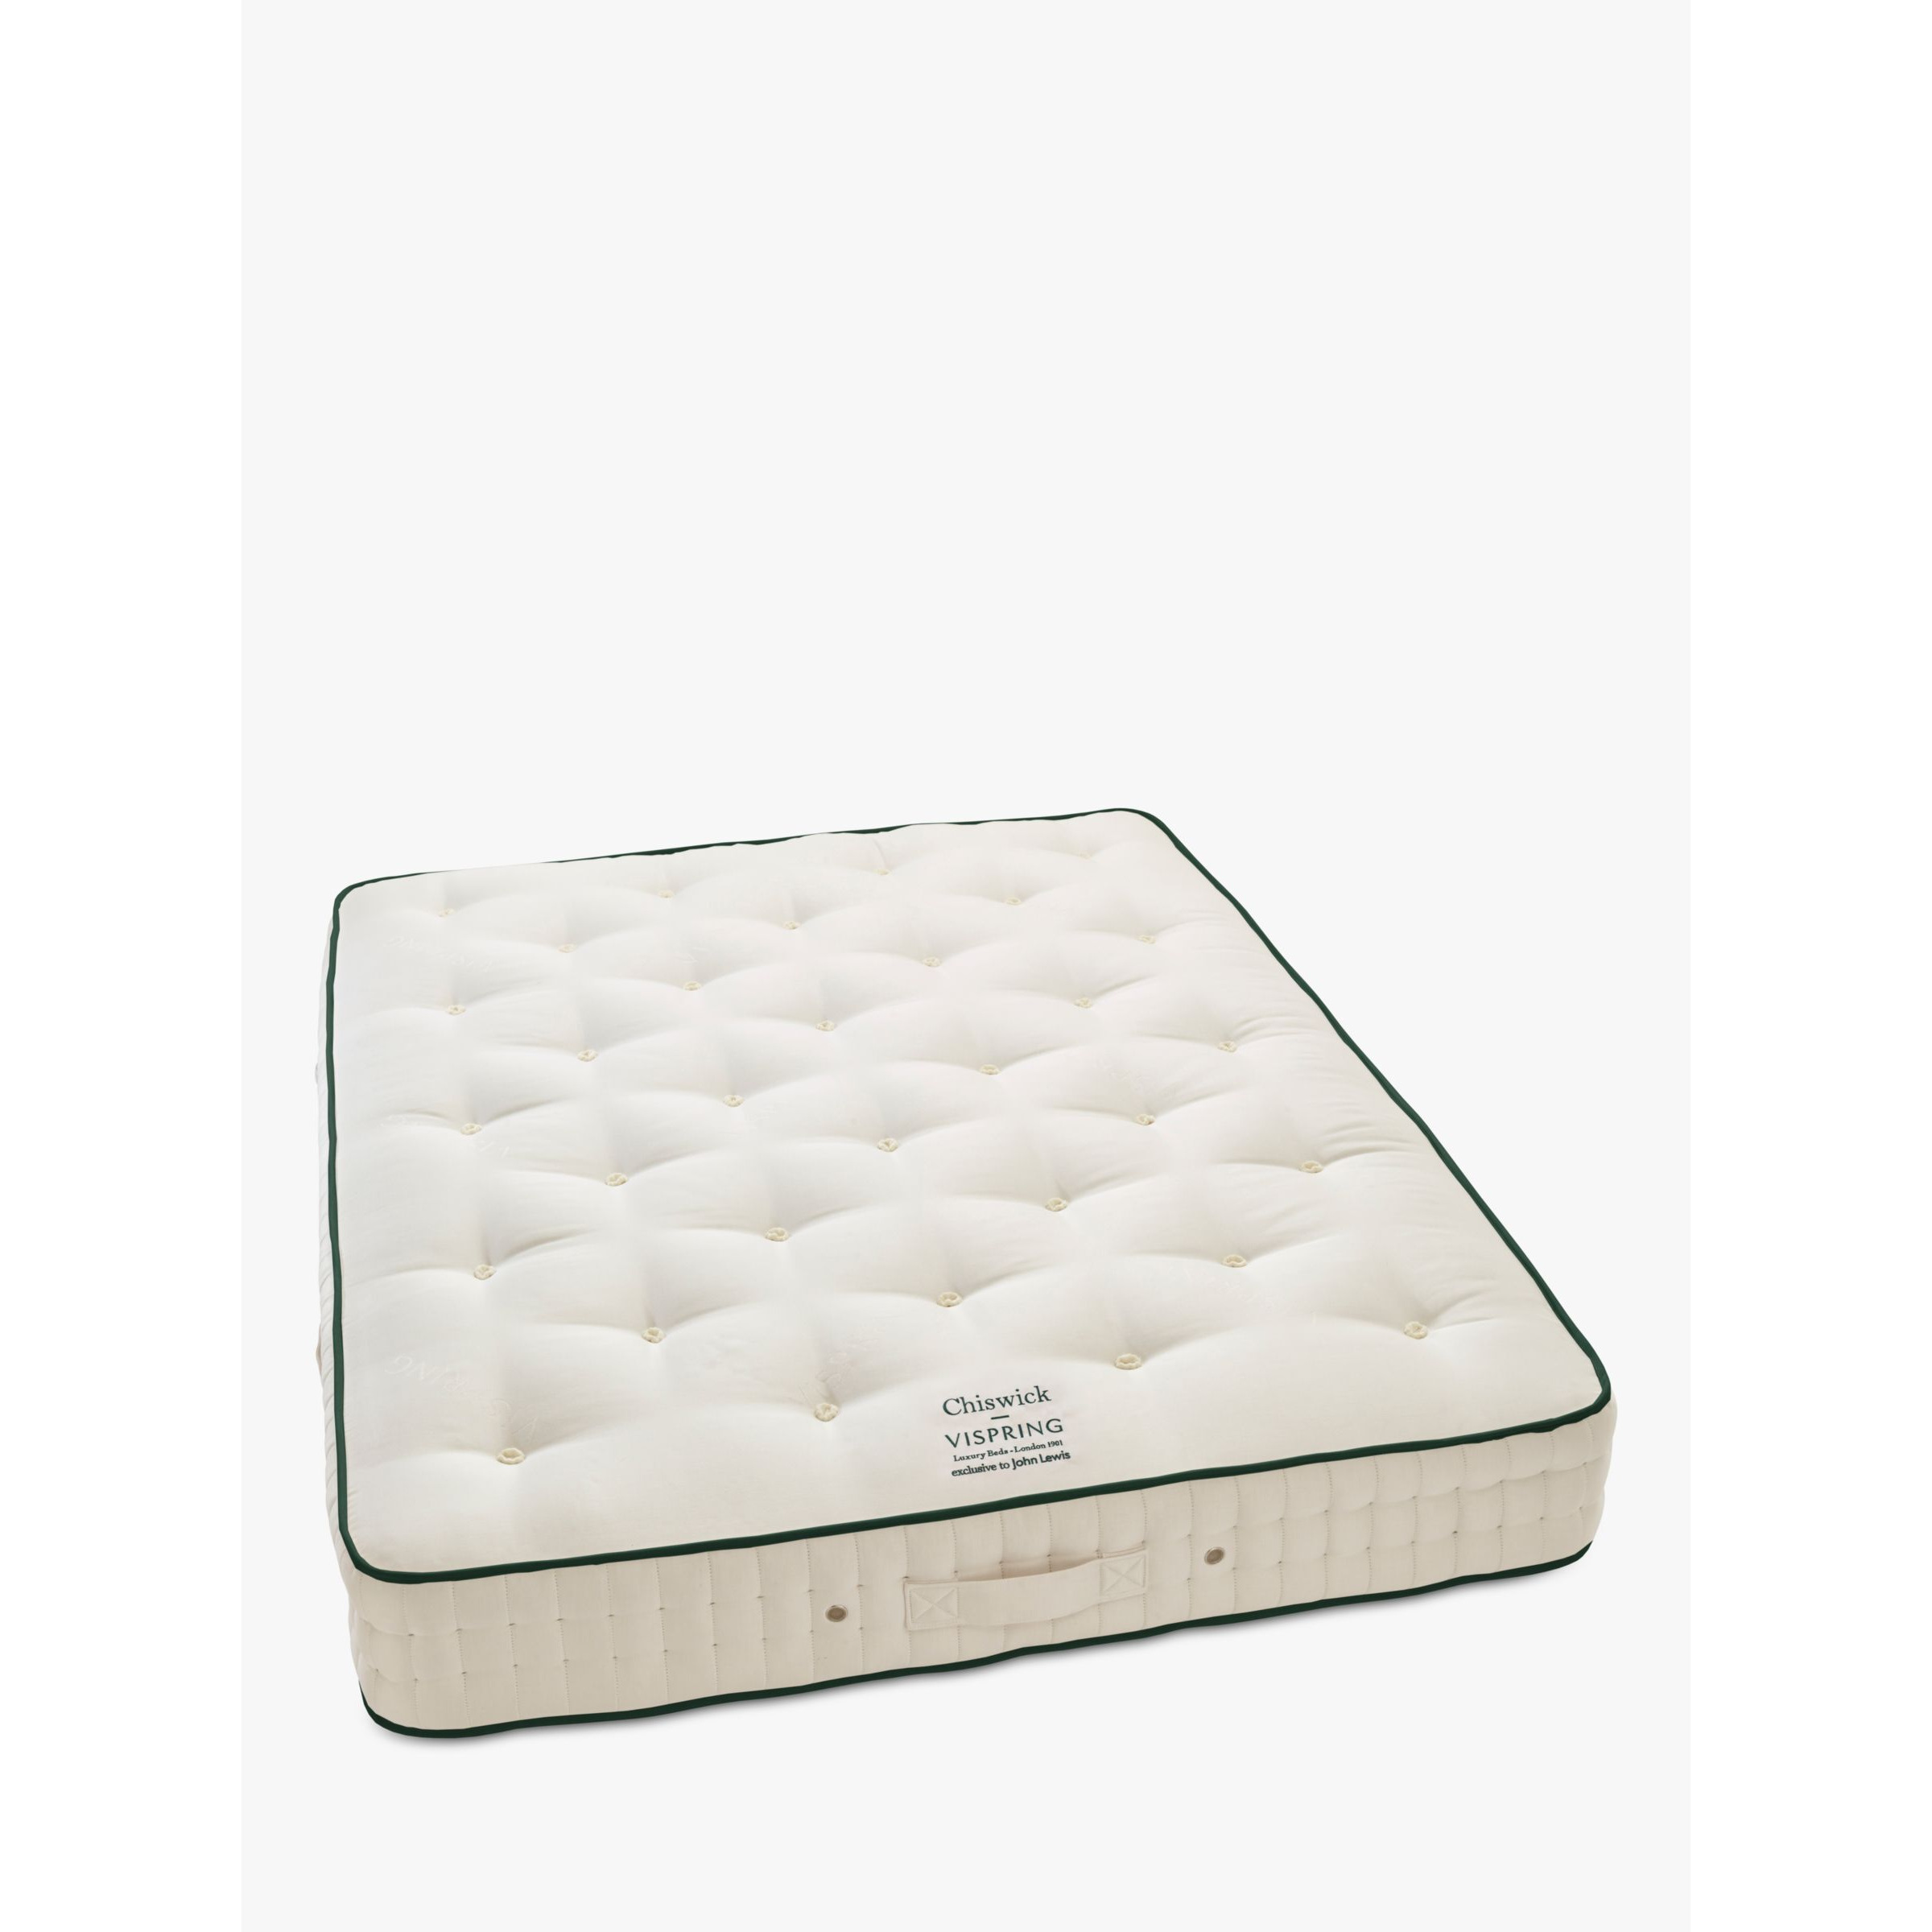 Vispring Chiswick Pocket Spring Mattress, Firm Tension, Double - image 1